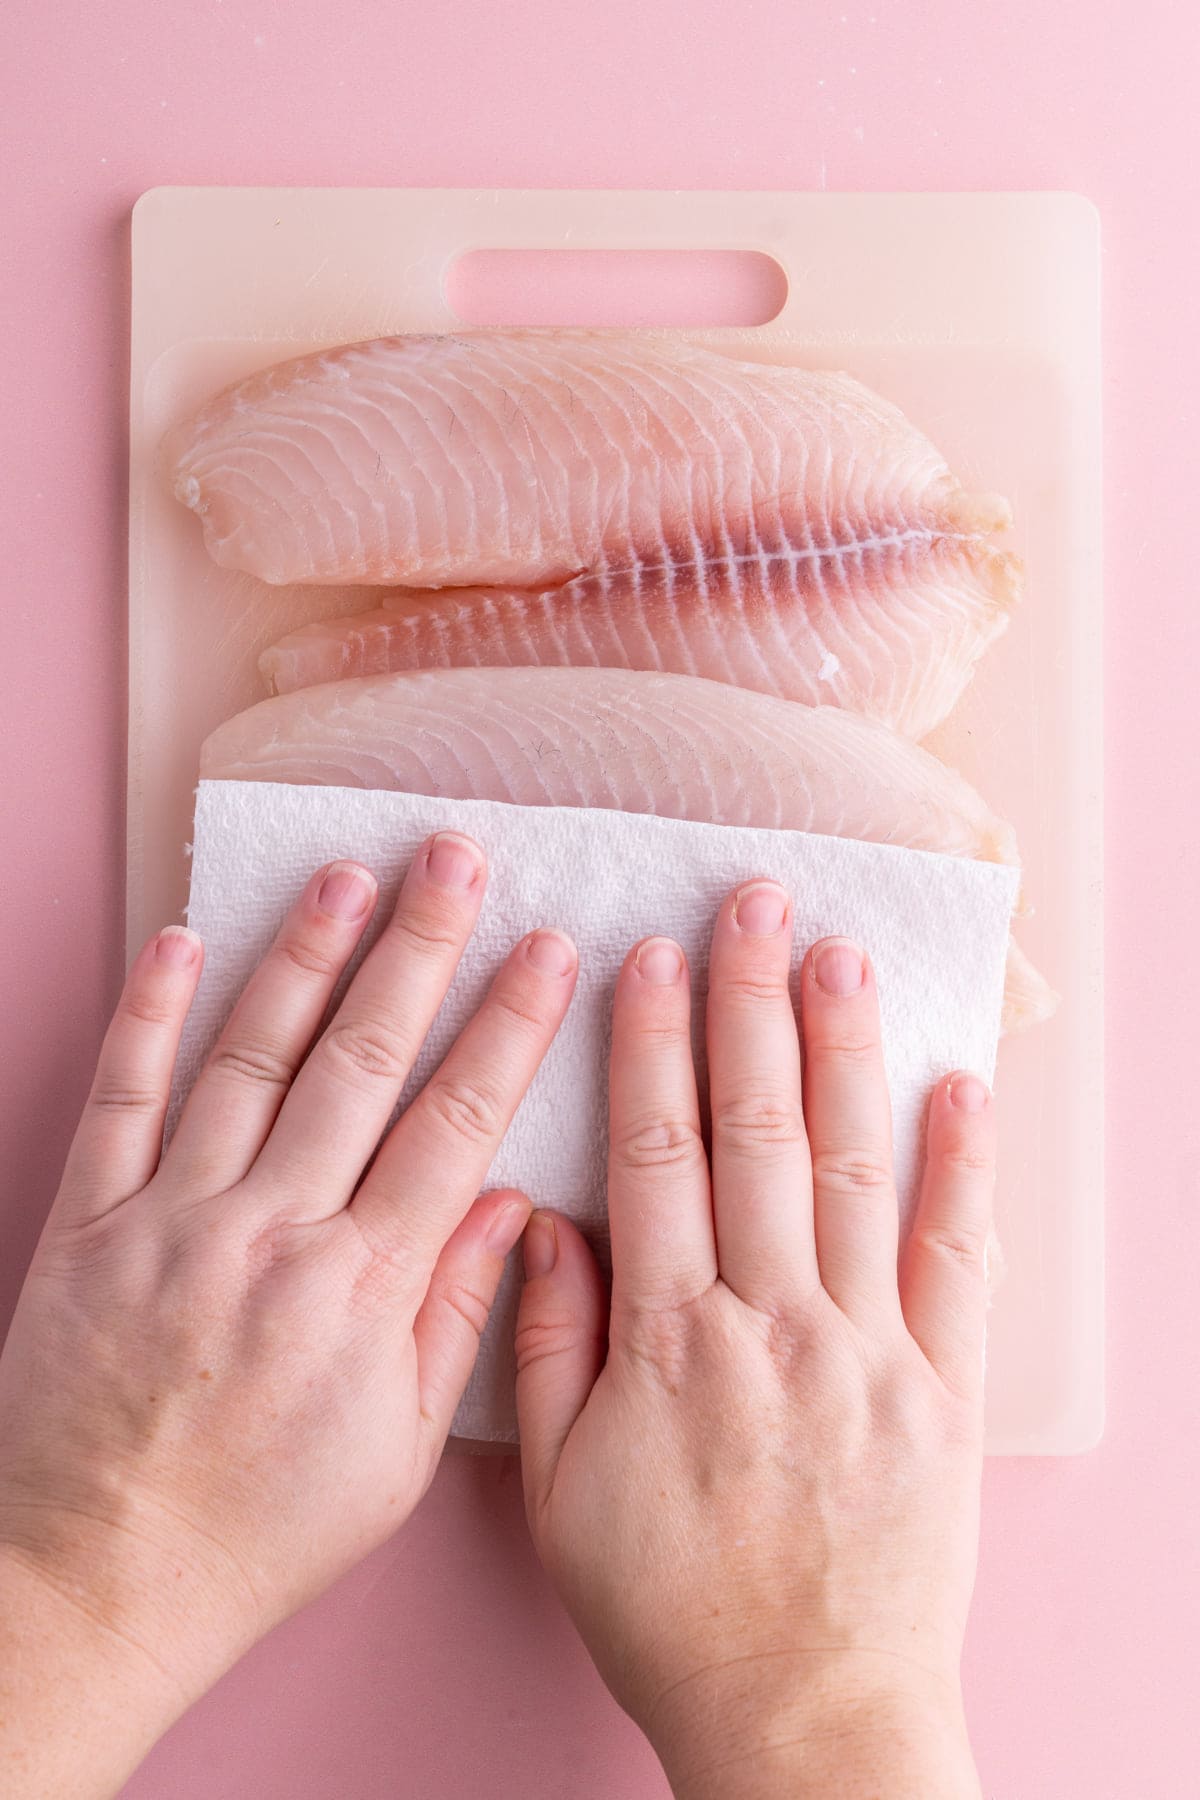 Patting tilapia dry with a paper towel